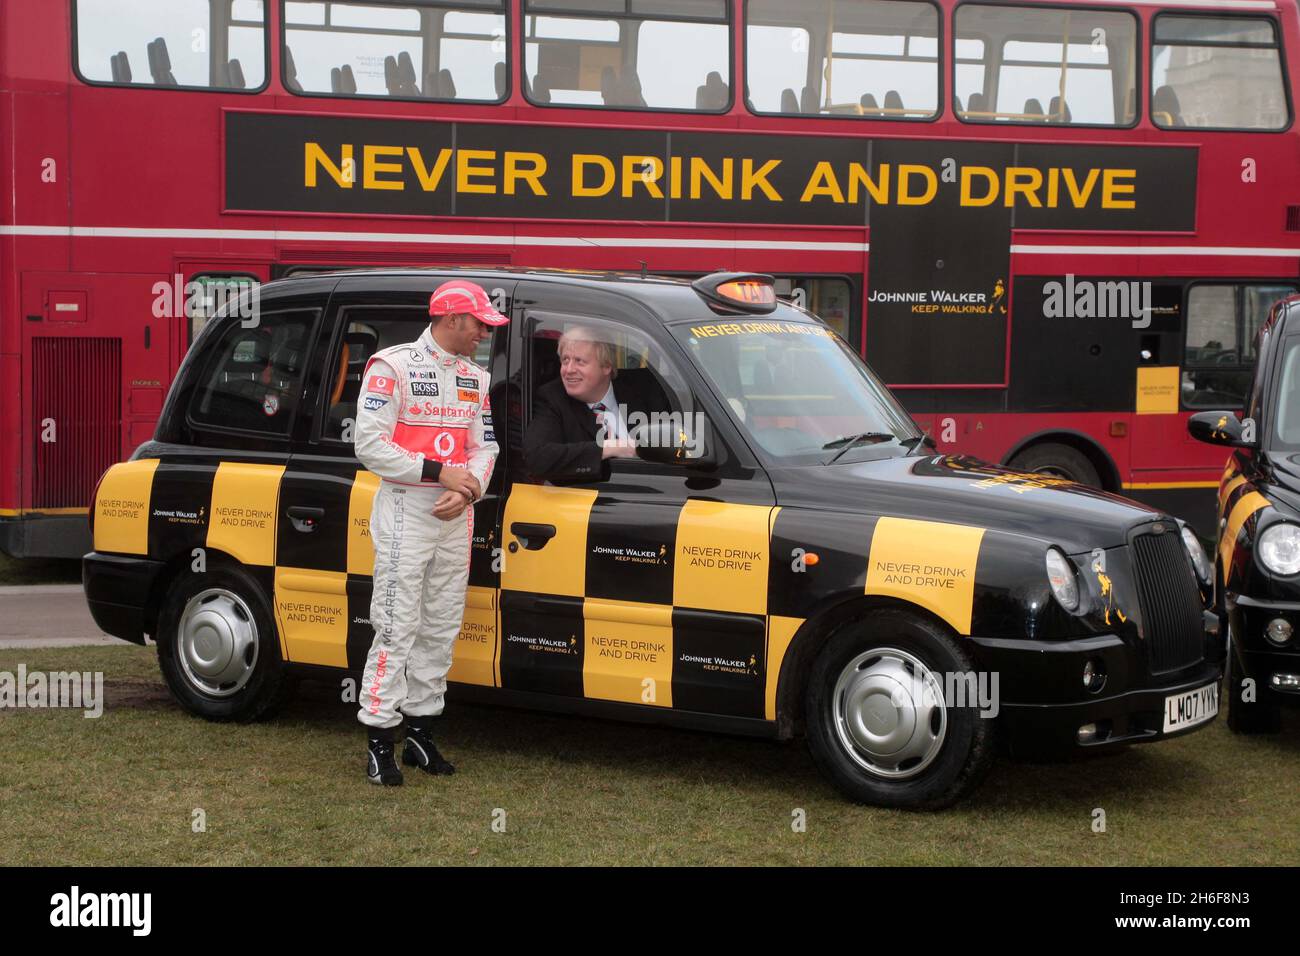 Mayor of London Boris Johnson backing Lewis Hamilton, the 2008 Formula 1  World Champion, as he drove a London taxi, to reinforce the Johnnie Walker  anti-drink drive campaign, reminding people to never